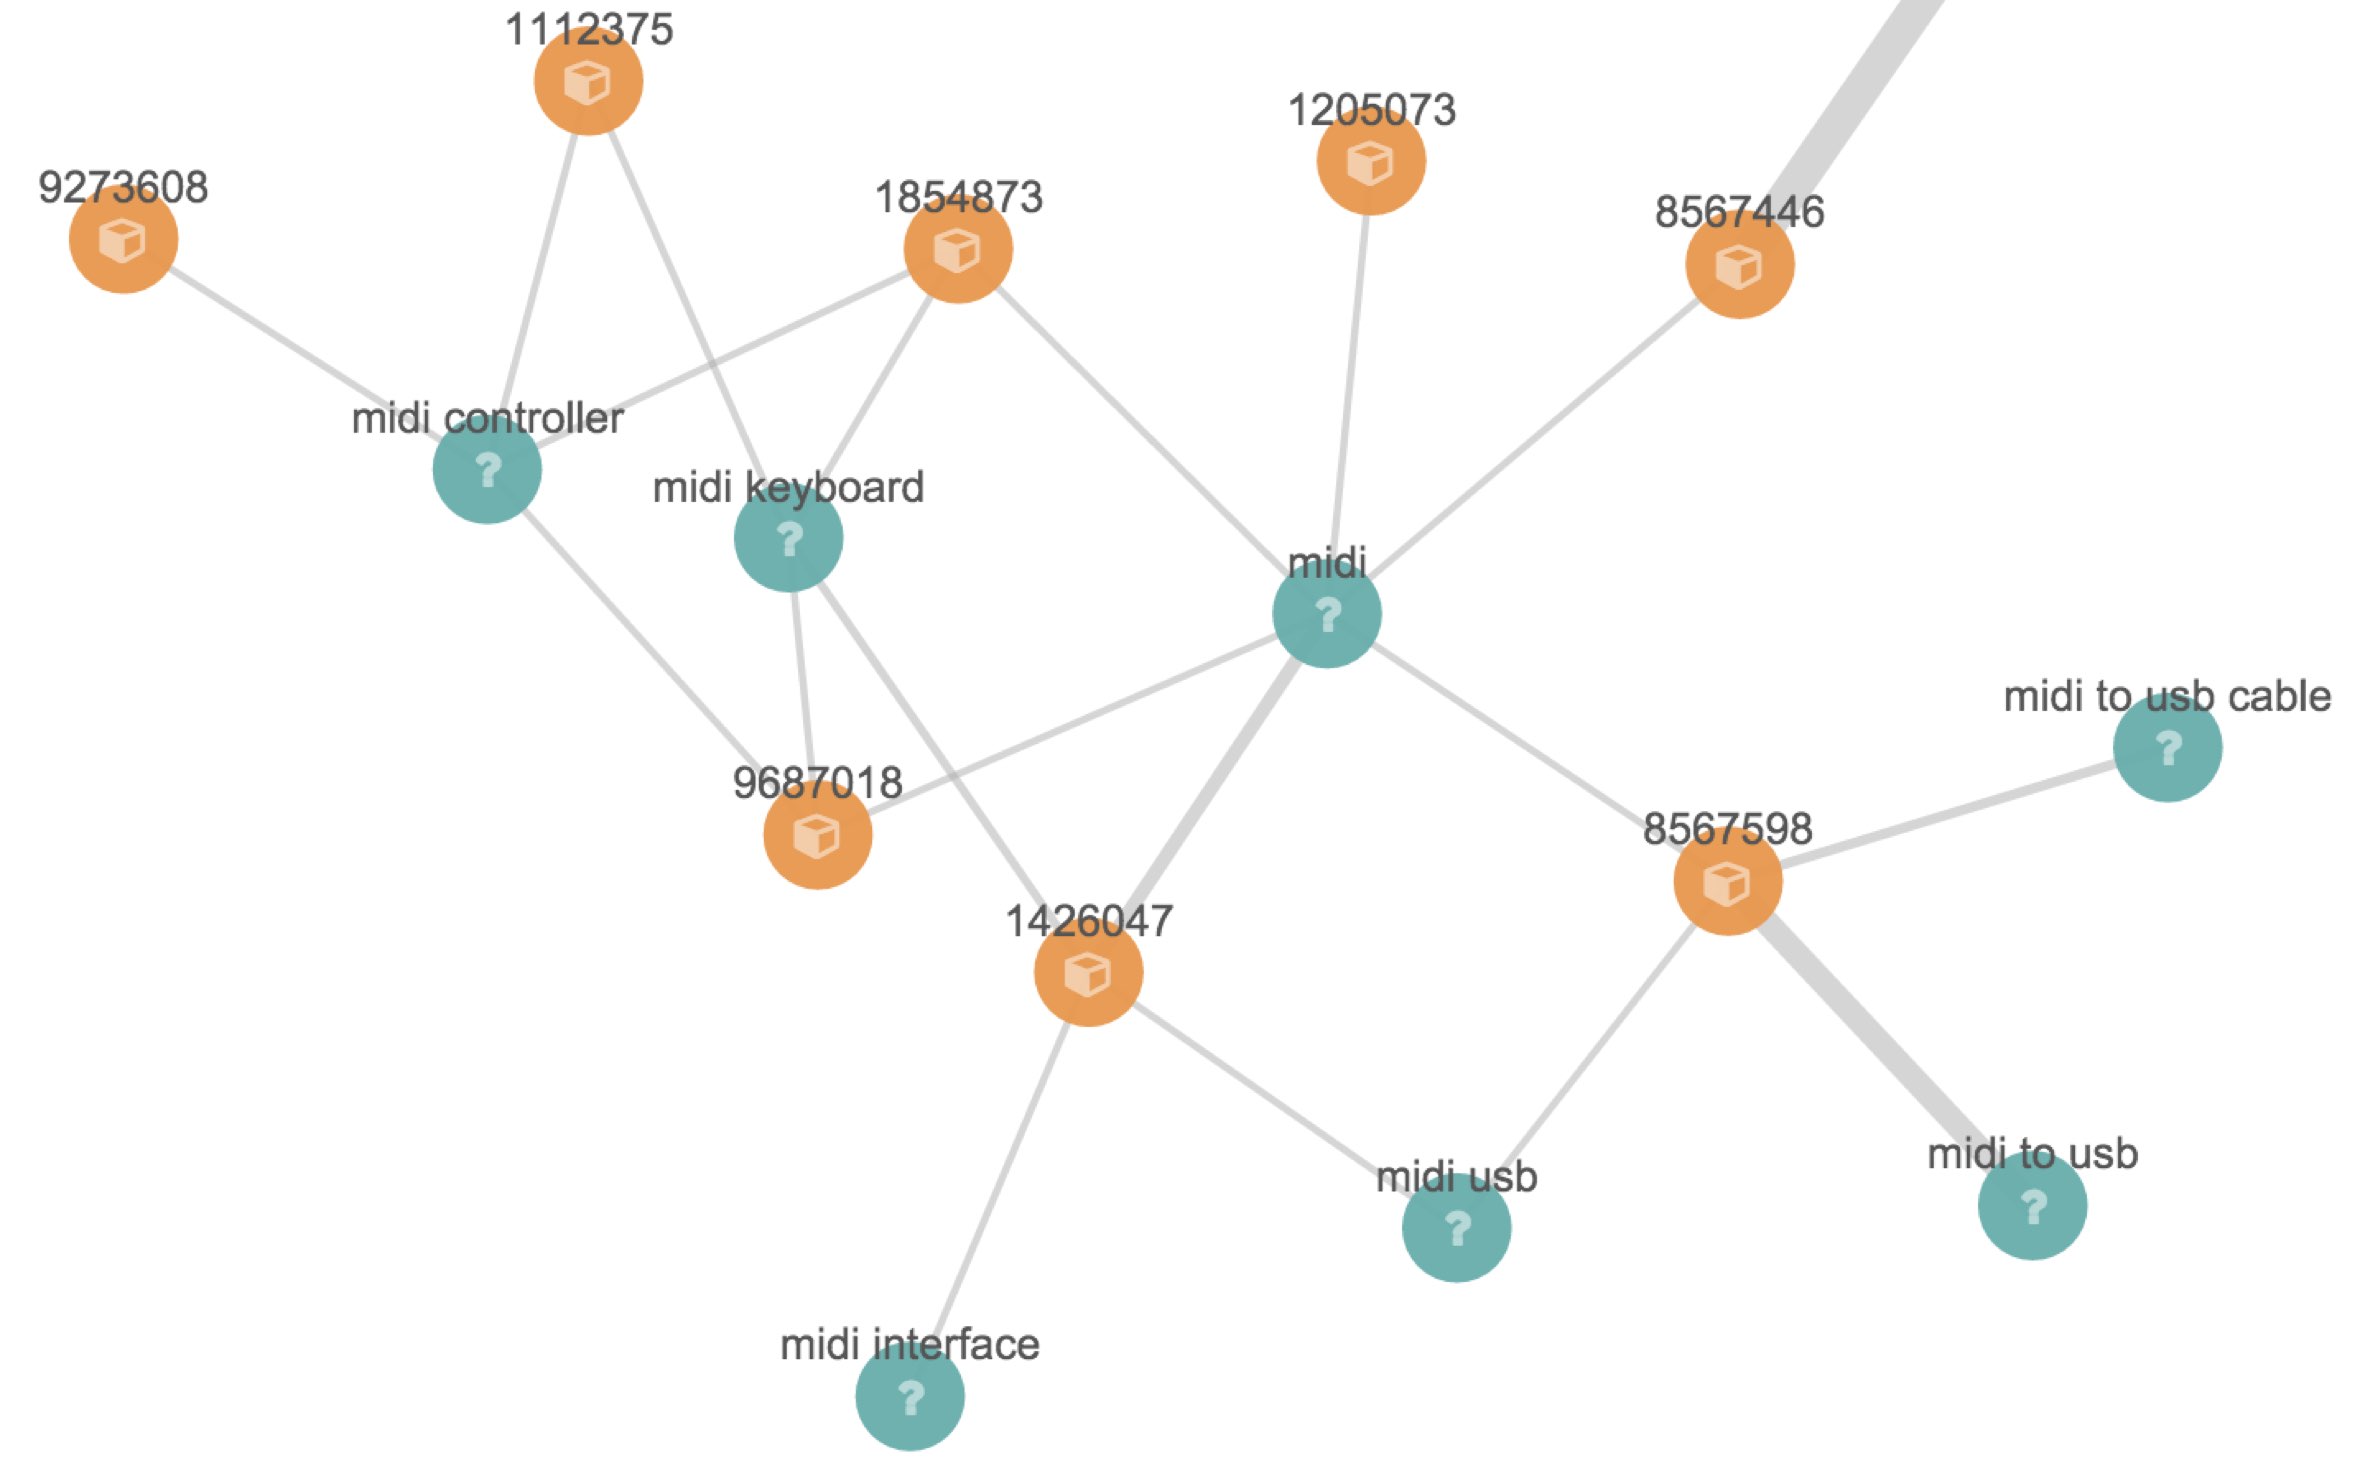 An example visualization of product/search click data using the Kibana graph plugin